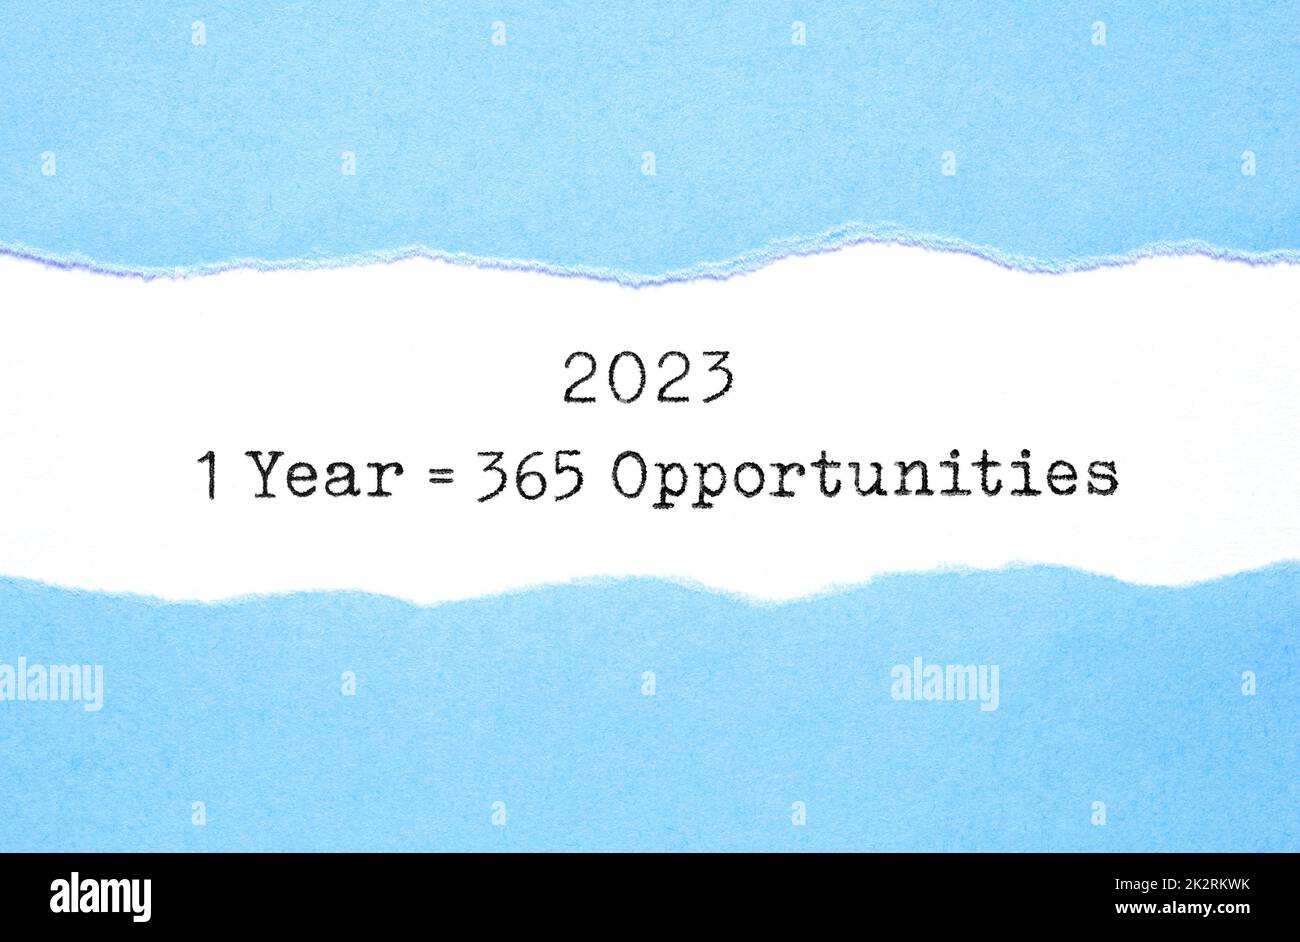 Inspirational Quote 1 Year 2023 Equal To 365 Opportunities Appearing Behind Torn Blue Paper New Beginning Motivational Concept 2K2RKWK 